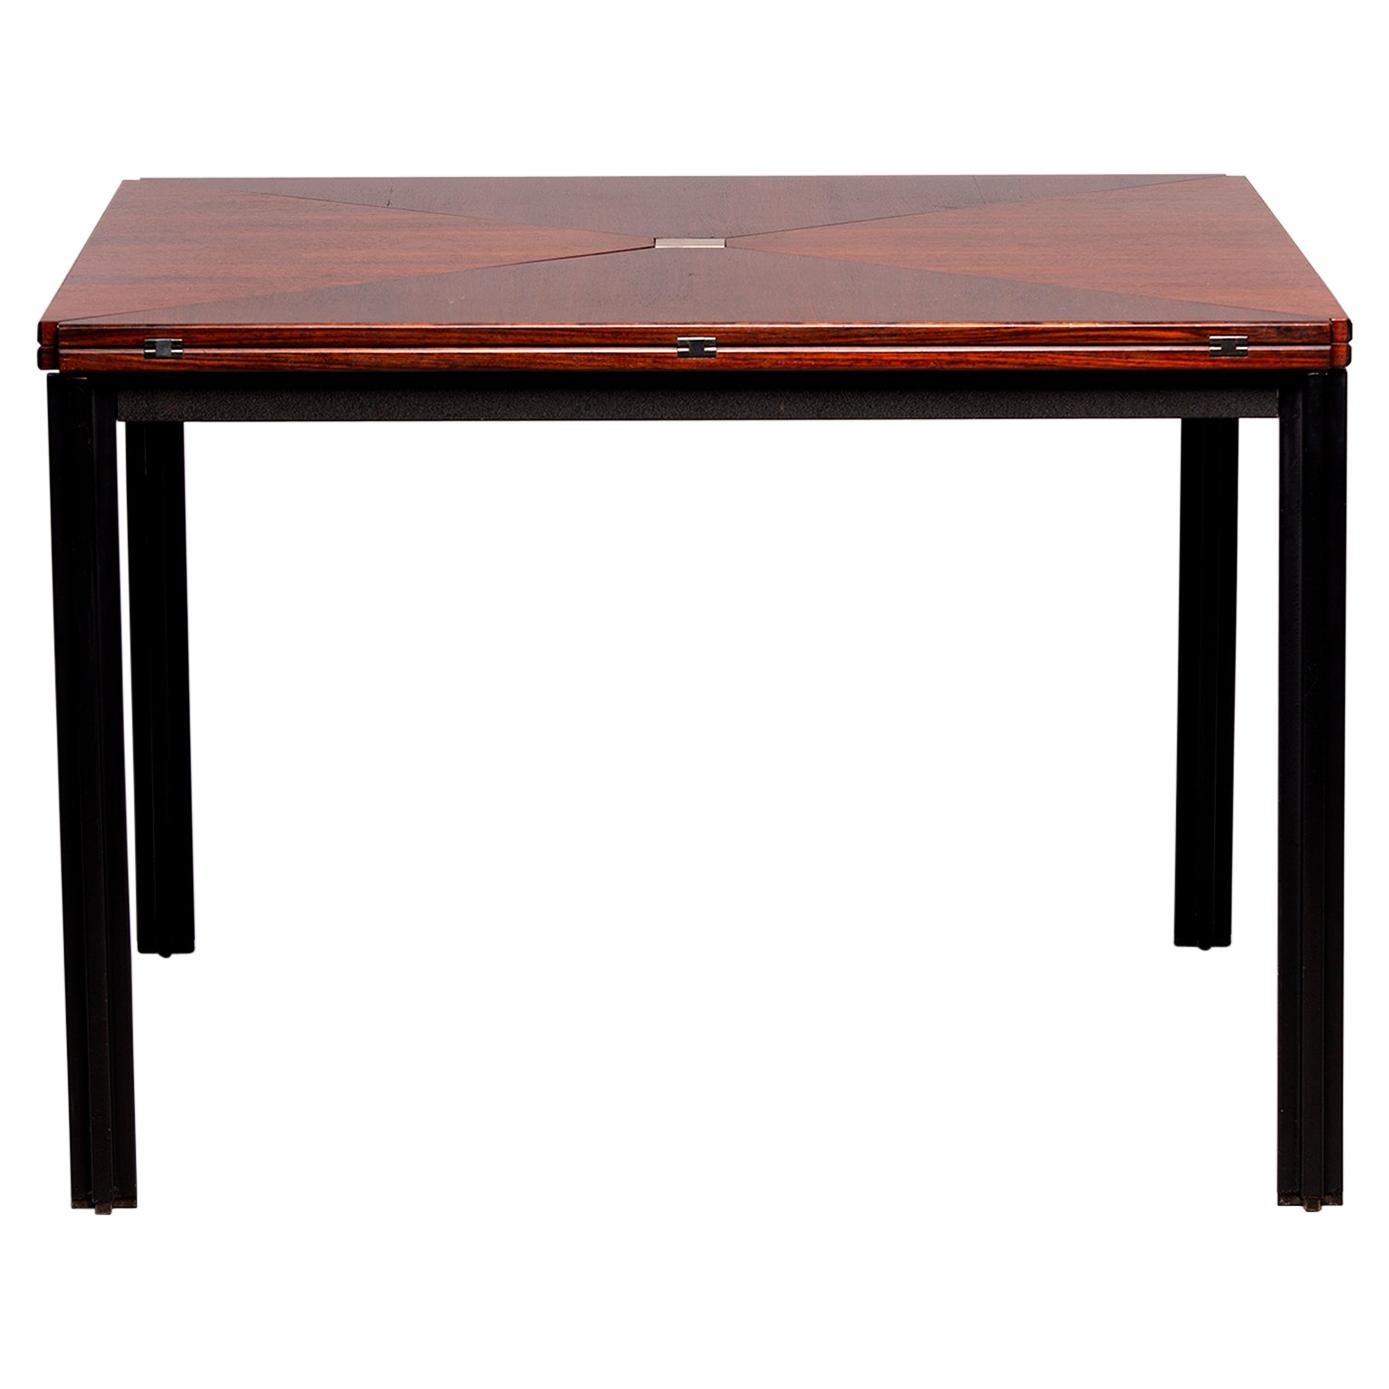 Tecno of Italy Rosewood Table with Fold Up Leaves